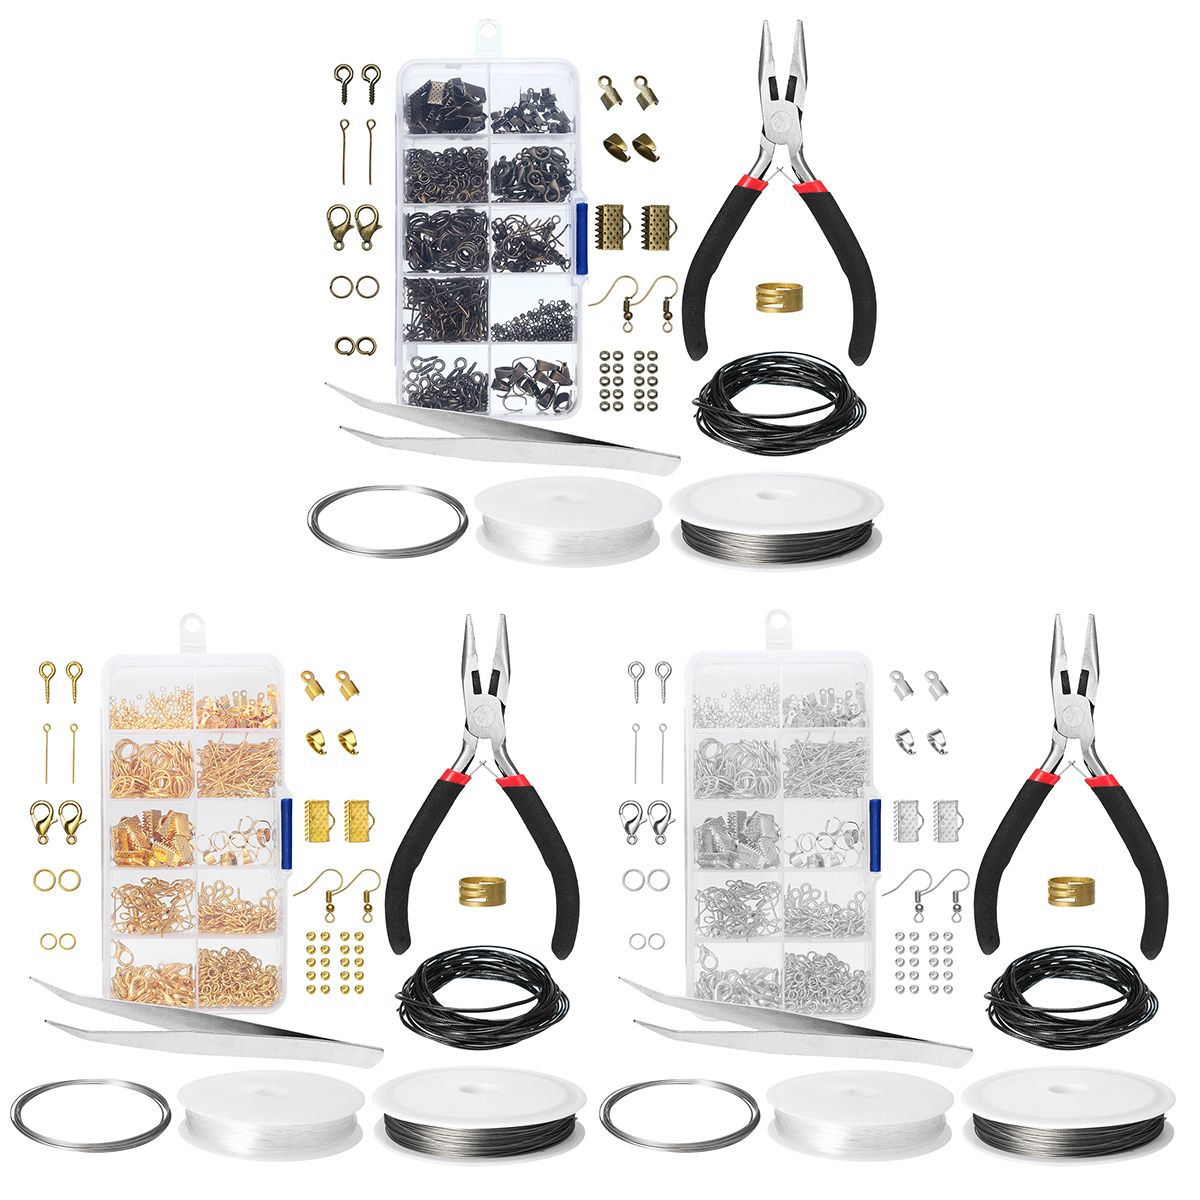 Wire-Jewelry-Making-Starter-Kit-Sterling-Repair-Tools-Craft-Supplies-Set-3-Color-1396091